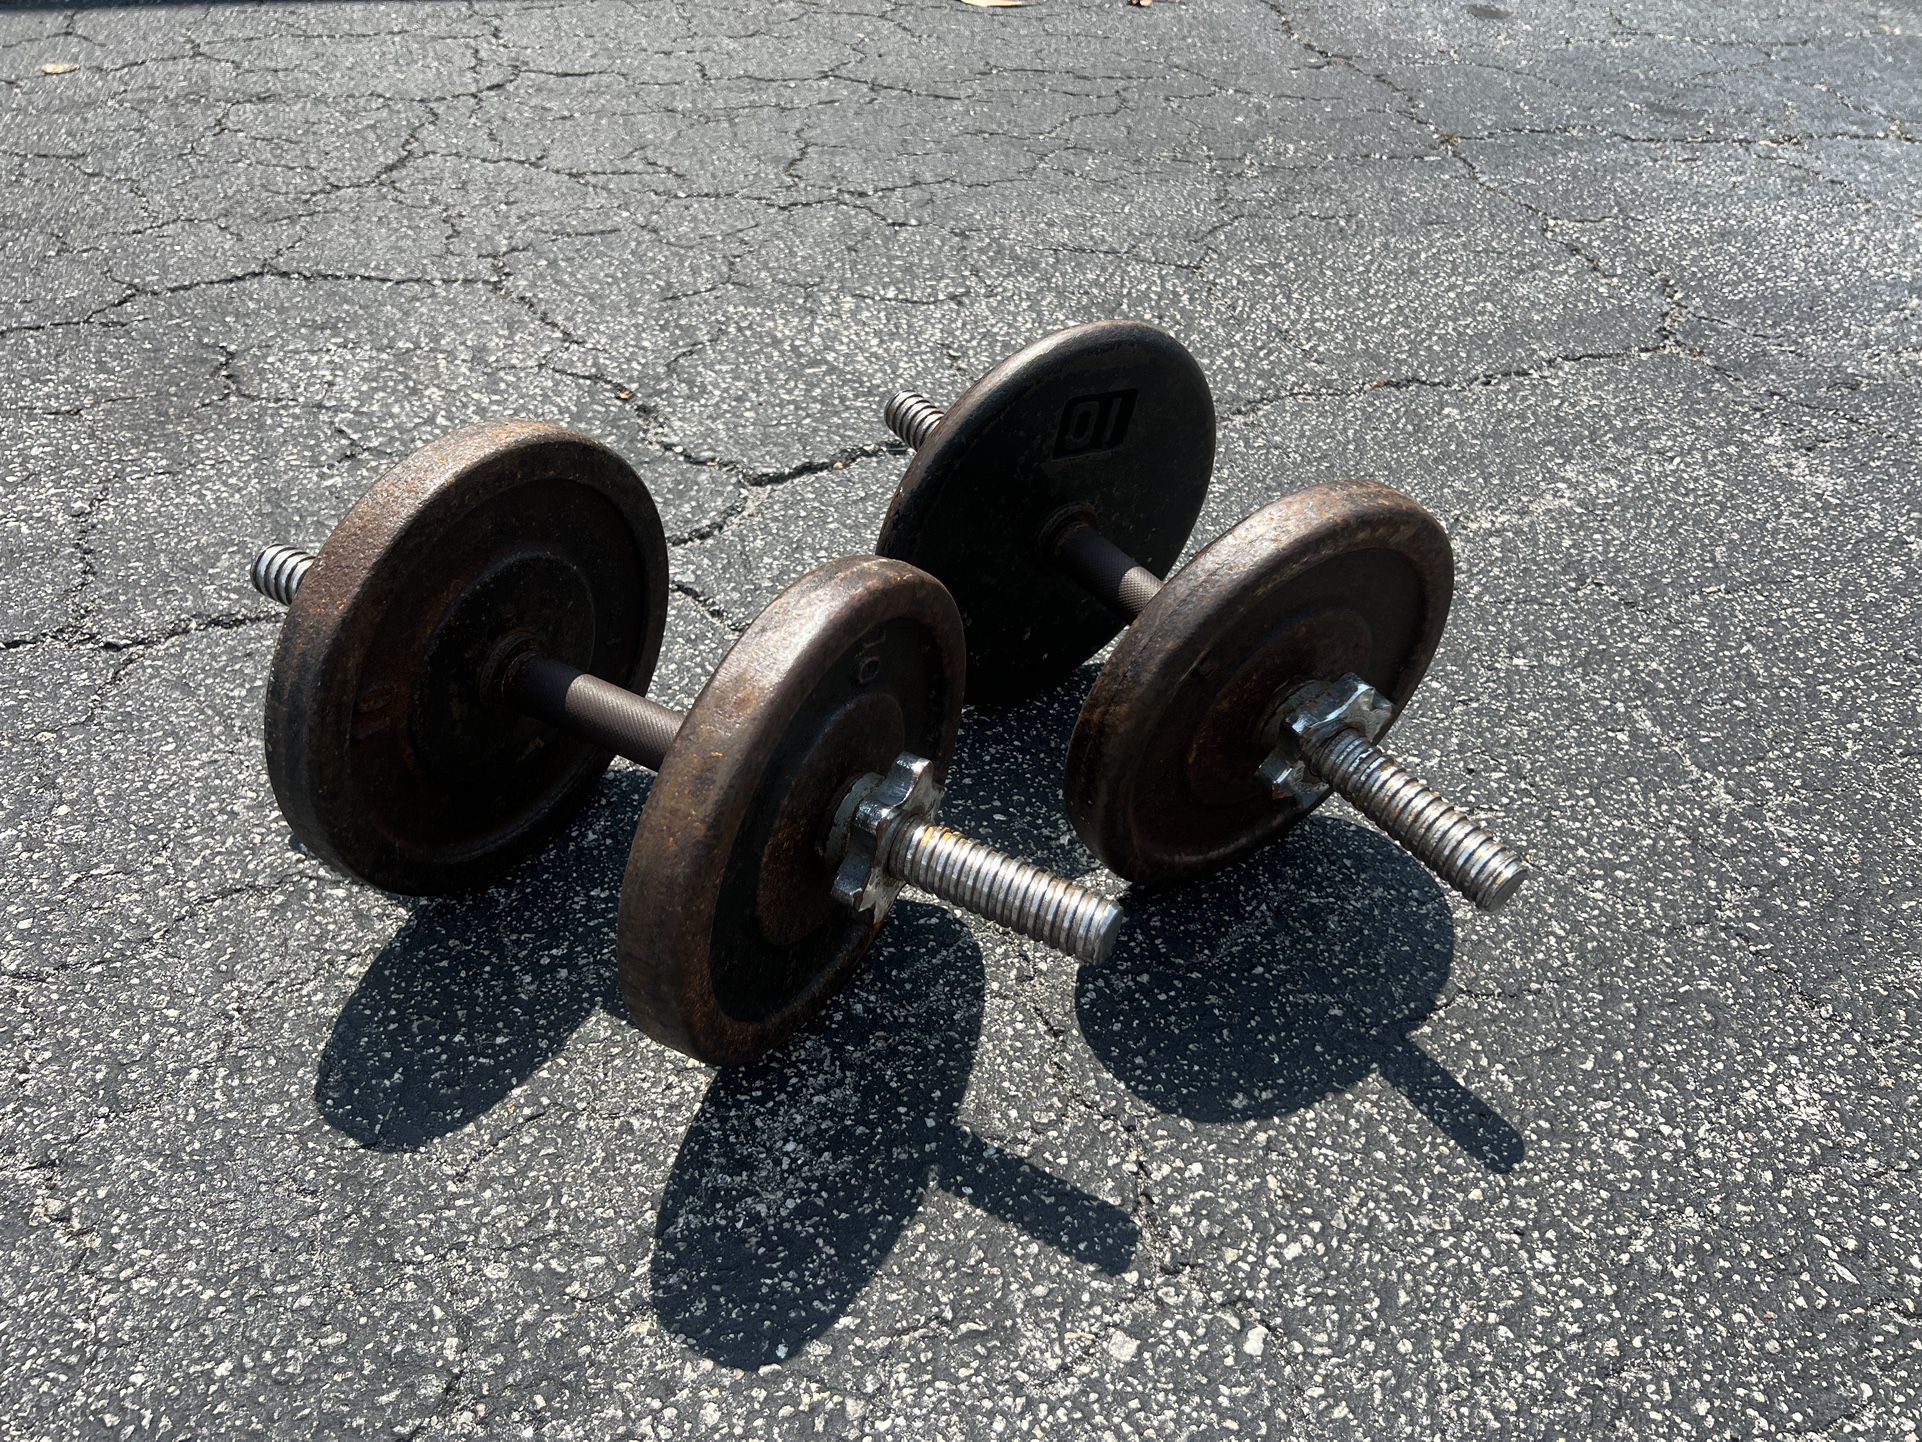 $40 for both! Two 20lb Vintage Iron Dumbbell Curling Workout Home Gym Weightlifting Weights with bars! 